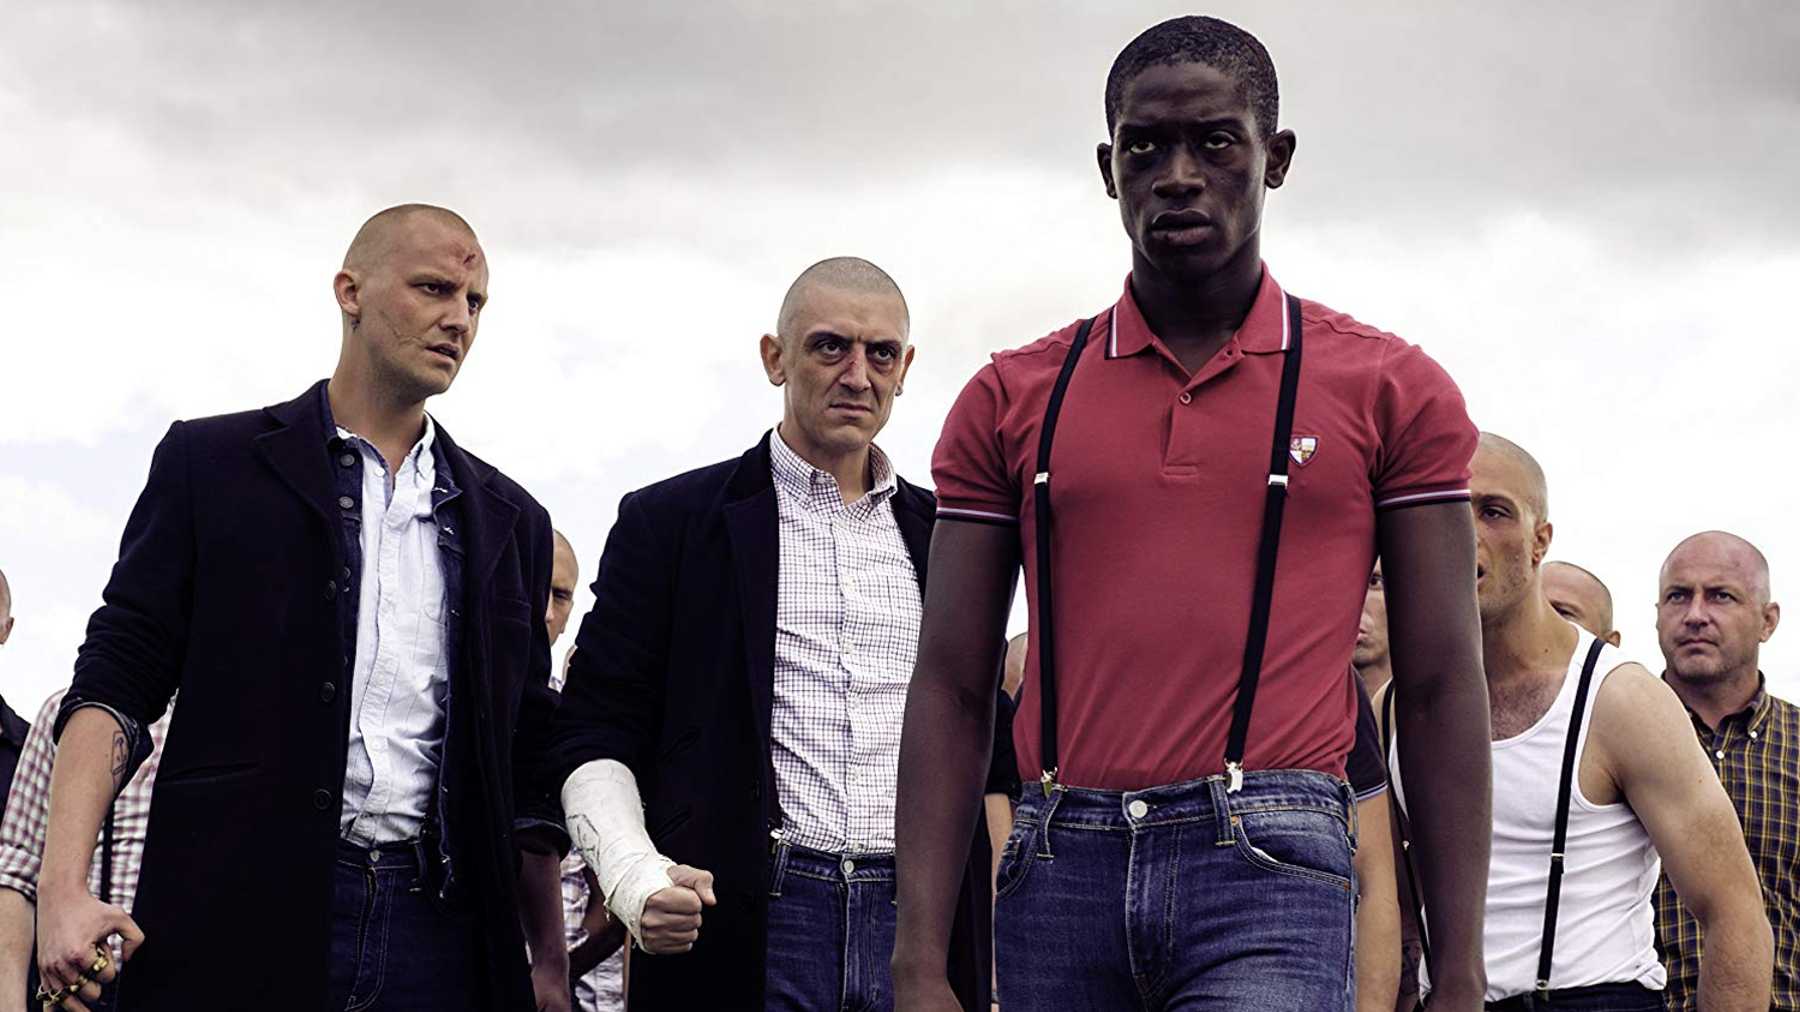 Farming is the true story of a Nigerian skinhead in 70s Essex